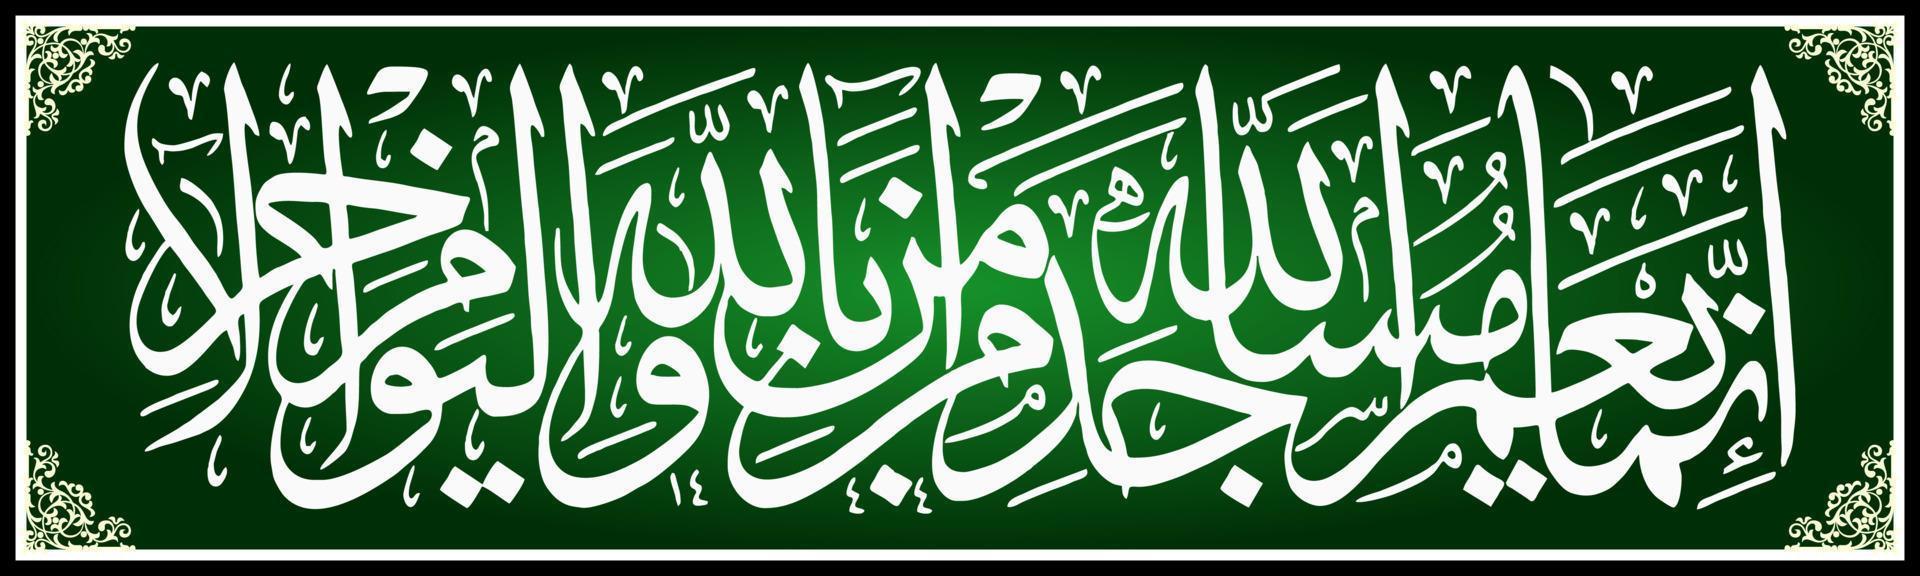 Arabic Calligraphy, Al Qur'an Surah At Taubah 18 , Translation Only those who prosper Allah's mosques are those who believe in Allah and the Day to come vector